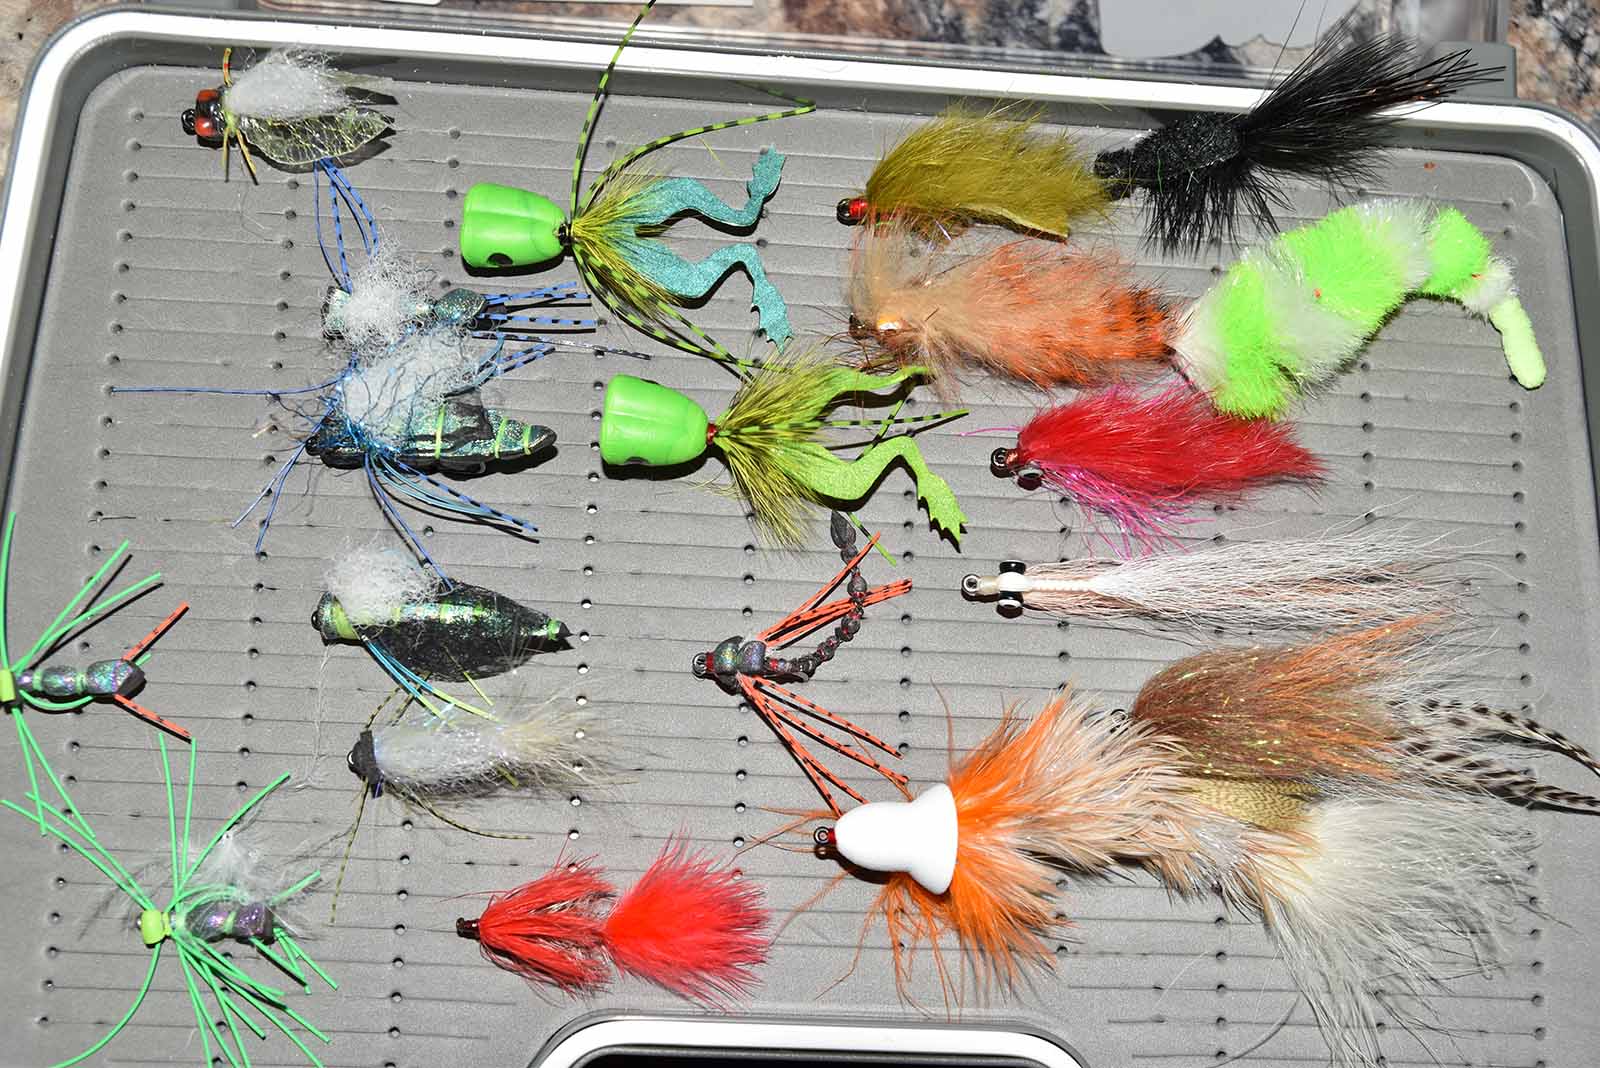 A tray holding a wide variety of colorful flies.